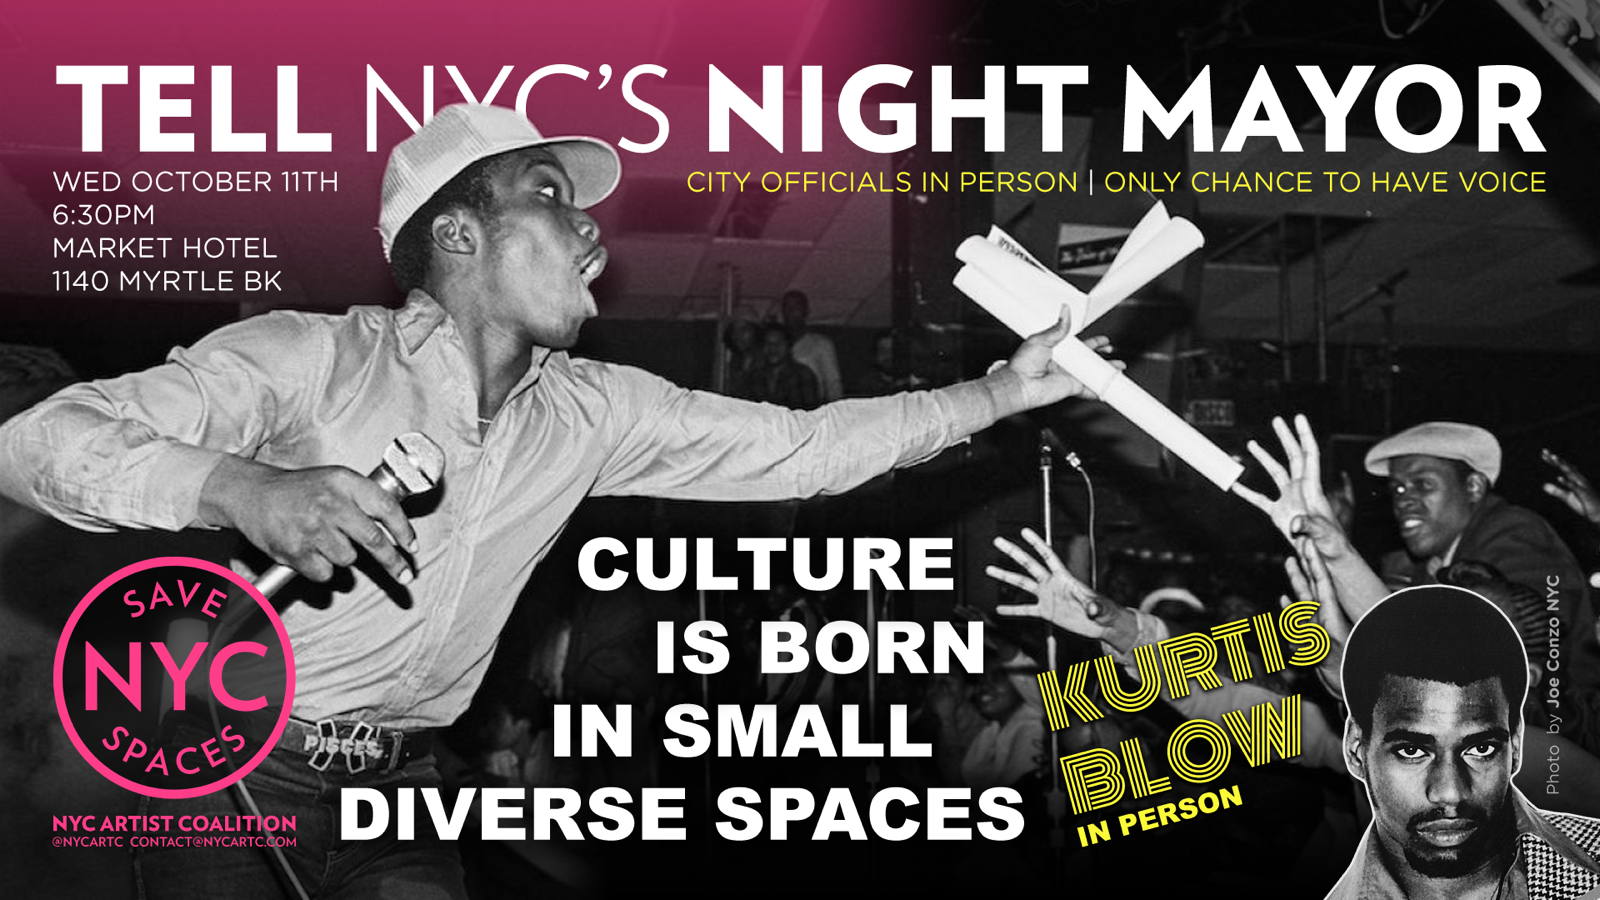 Tell NYC's Night Mayor: Save NYC Spaces